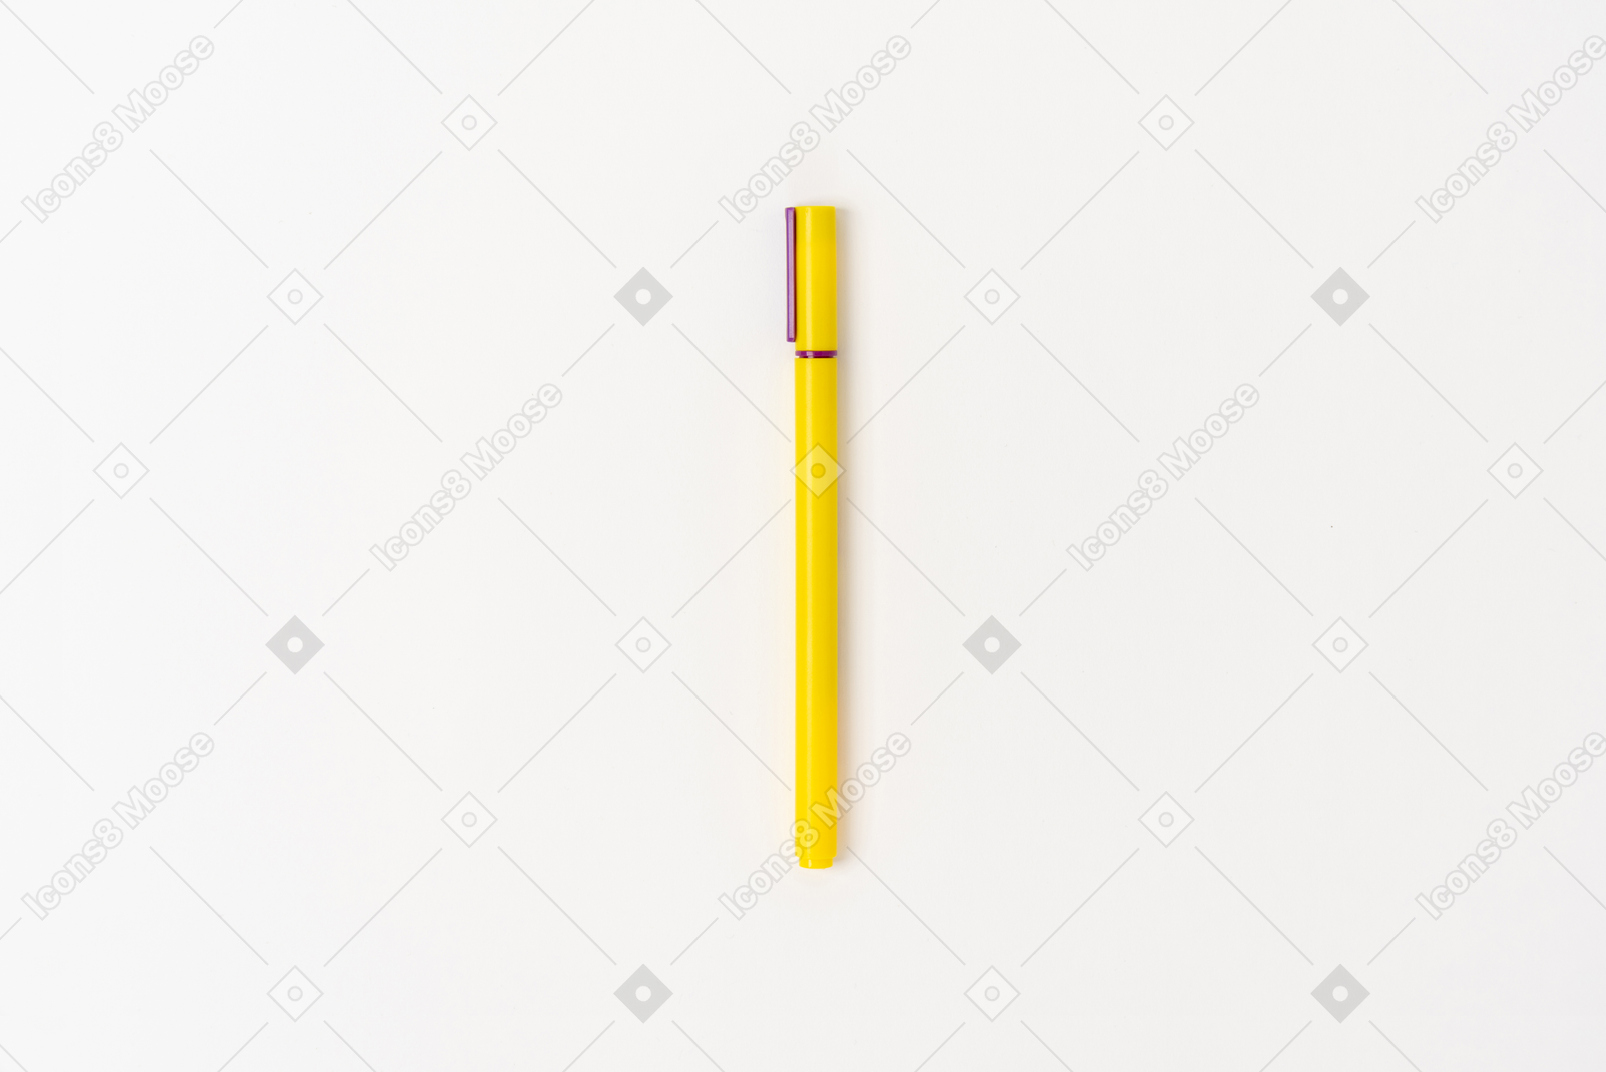 Isolated object on white background